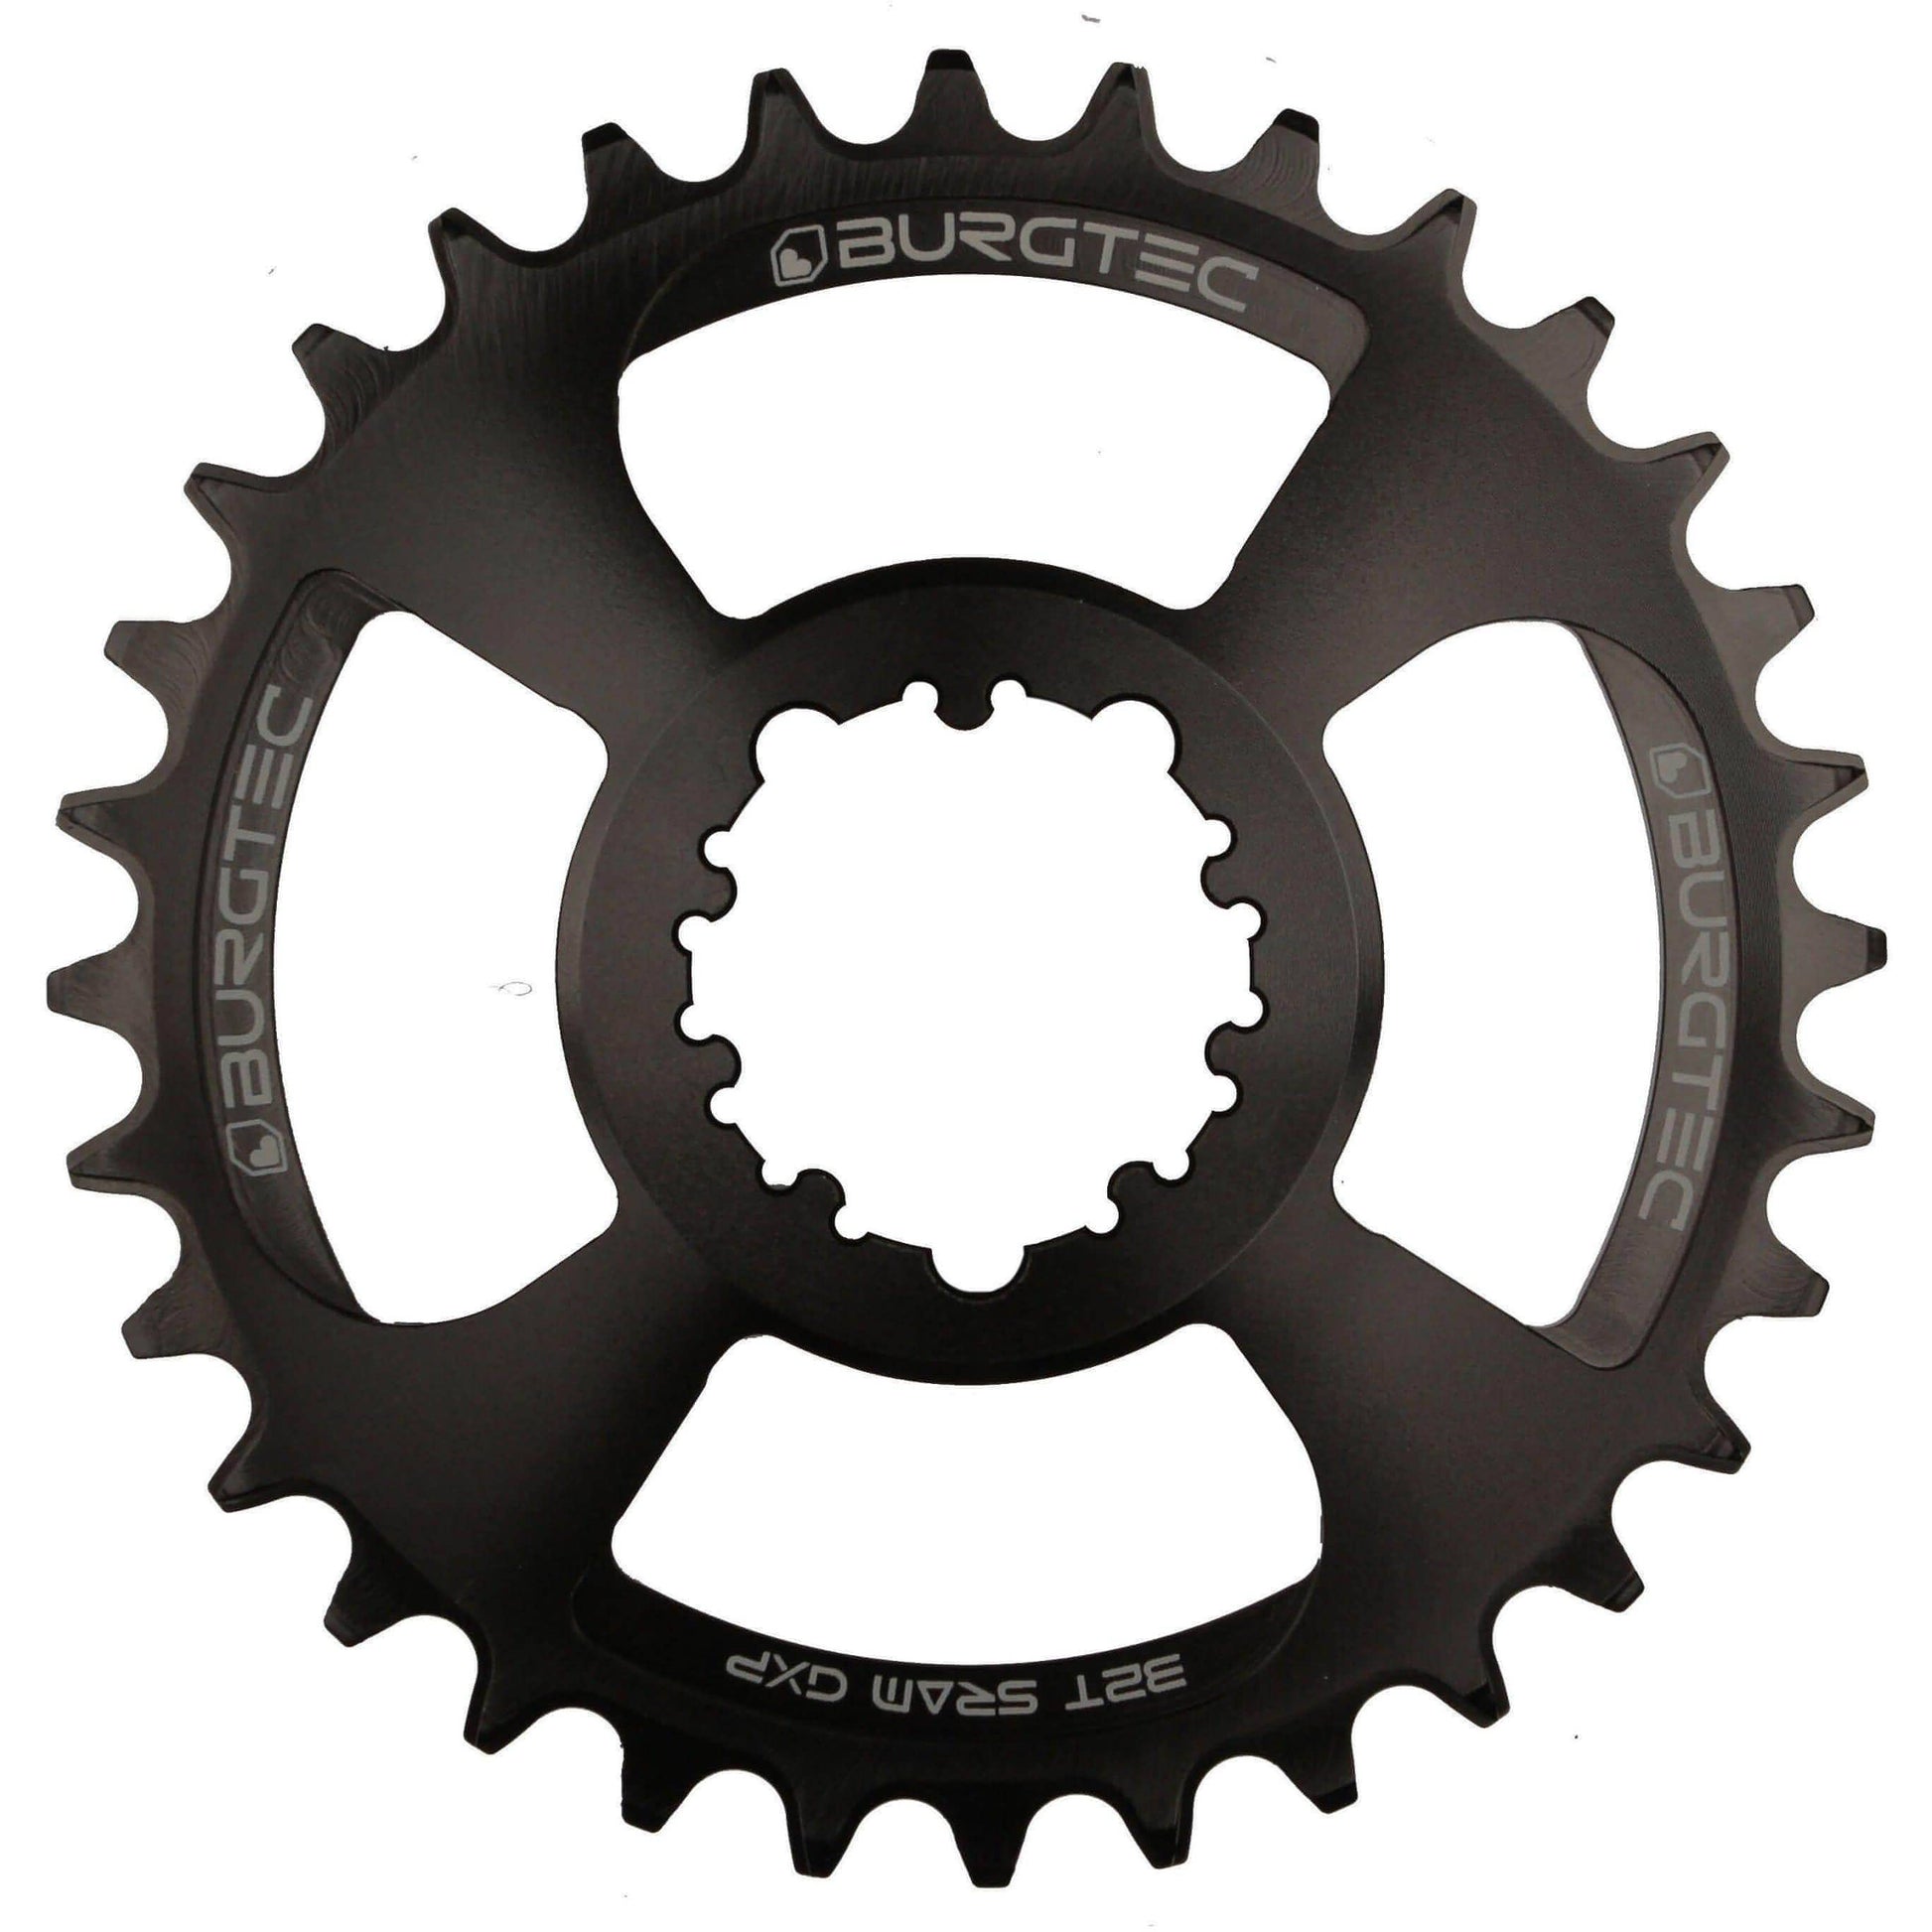 Burgtec GXP Boost Thick Thin Chainring - Black 713830992840 - Start Fitness